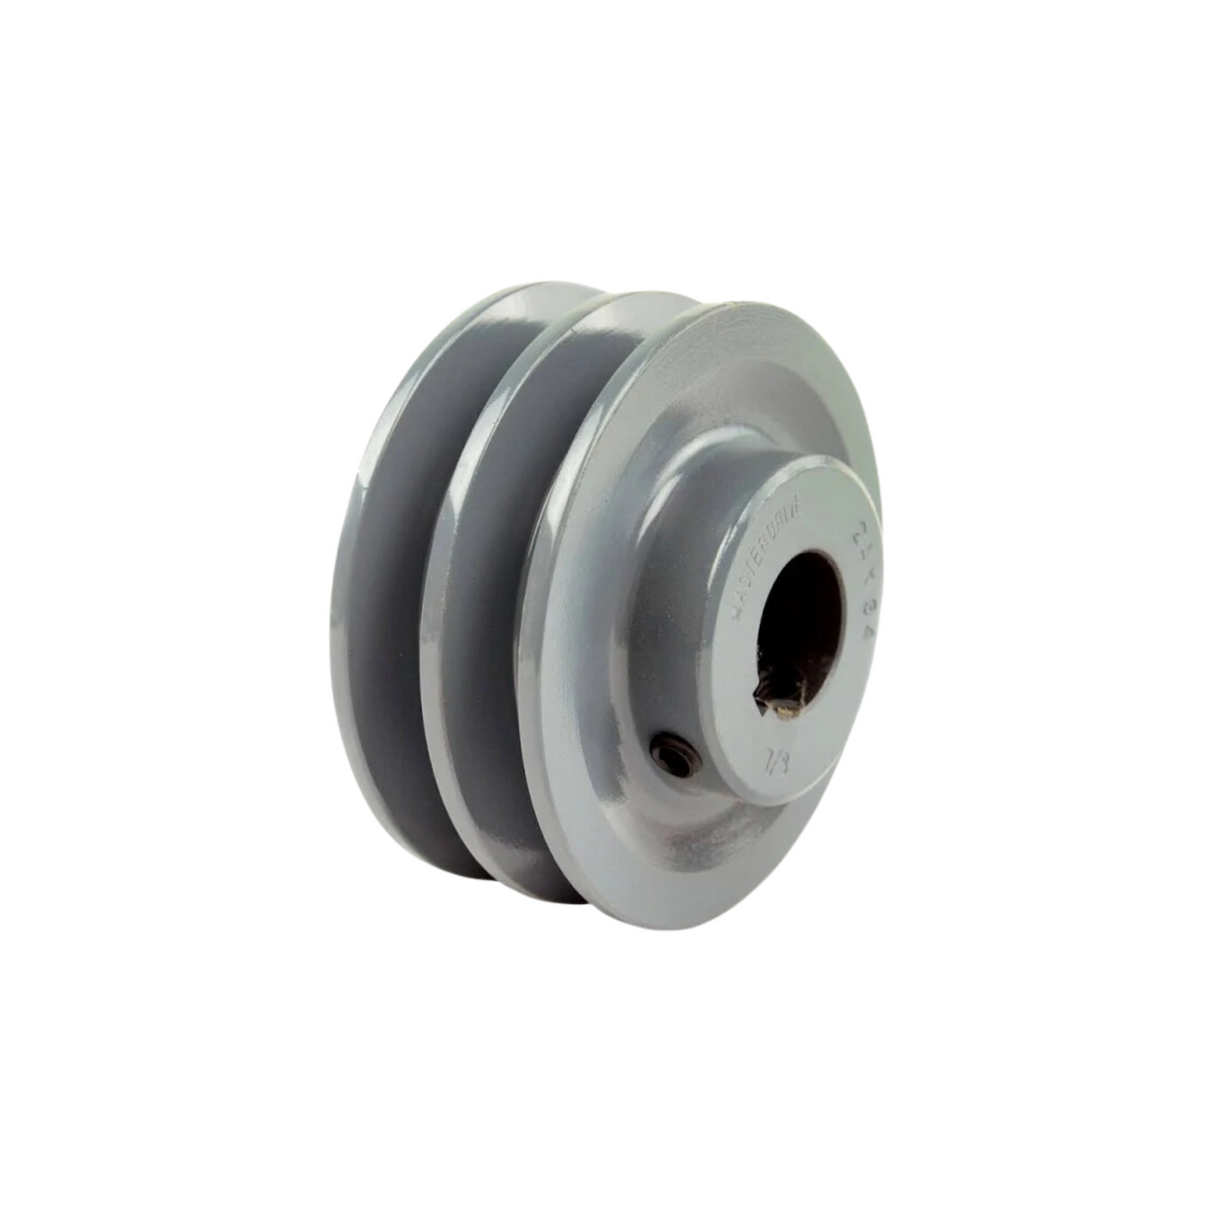 Champion 110290 Motor Pulley (D8325 X 7/8")